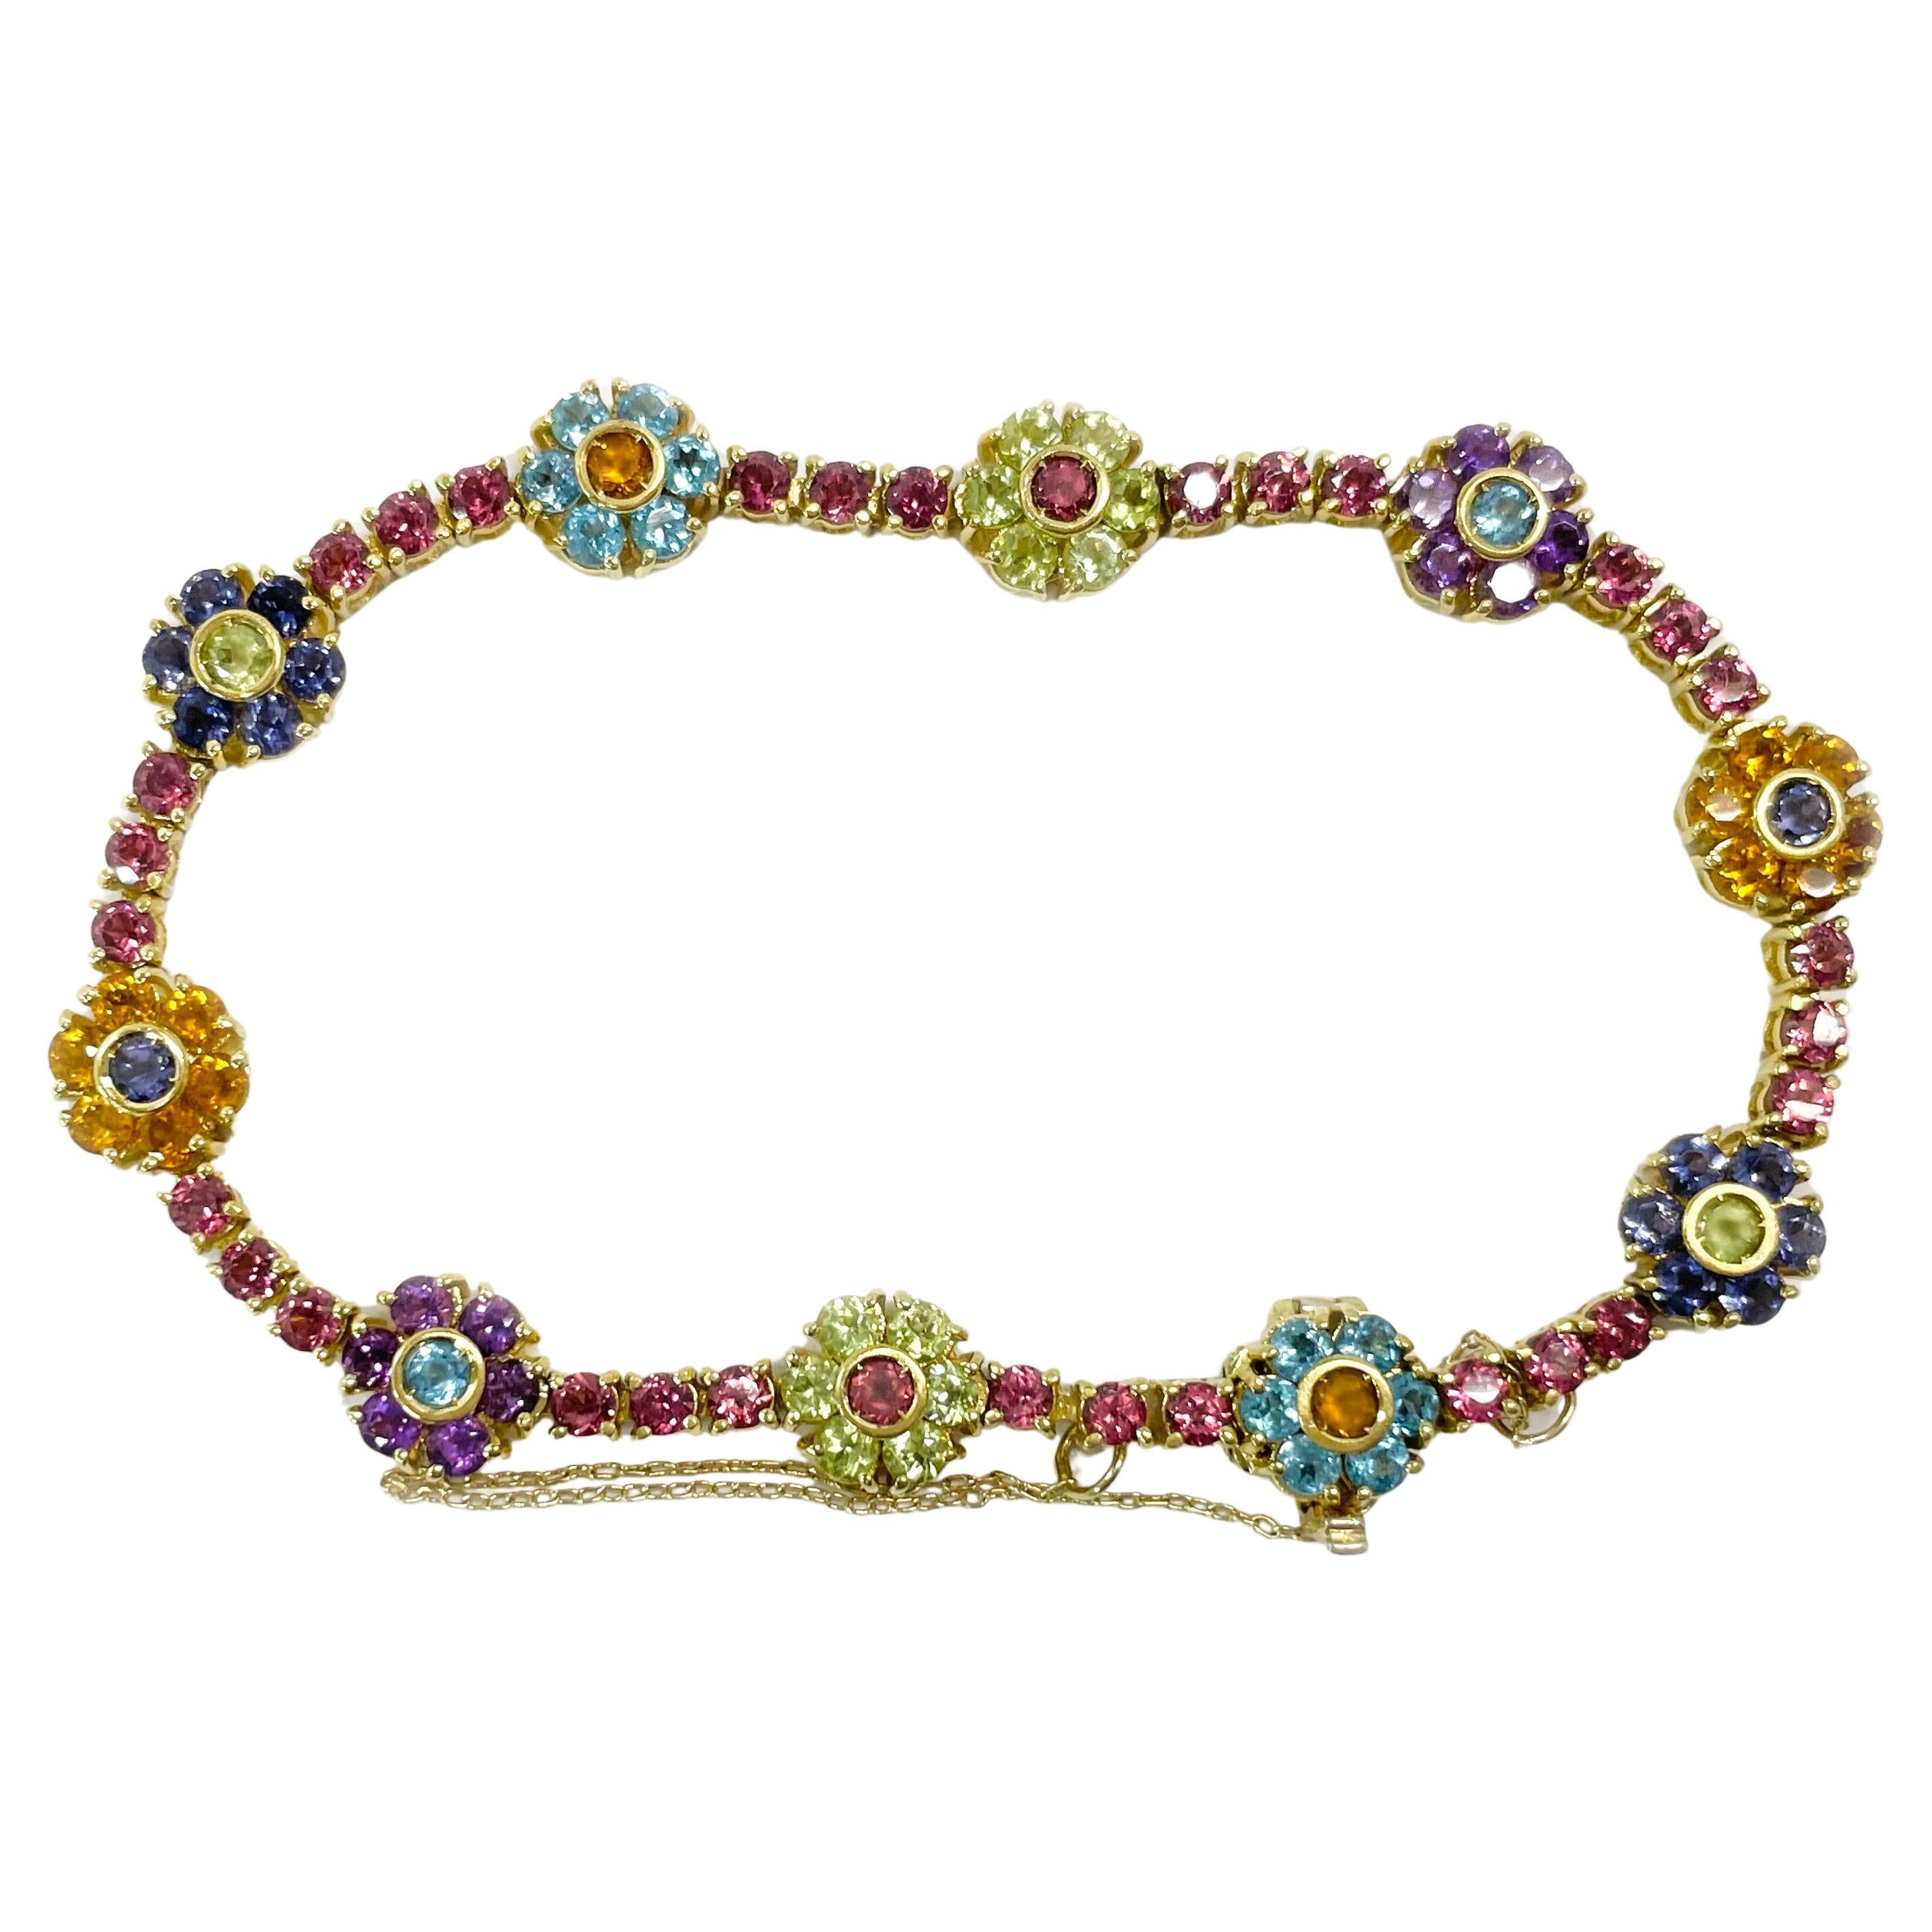  Pasquale Bruni Yellow Gold Multi-Gemstone Floral Bracelet For Sale